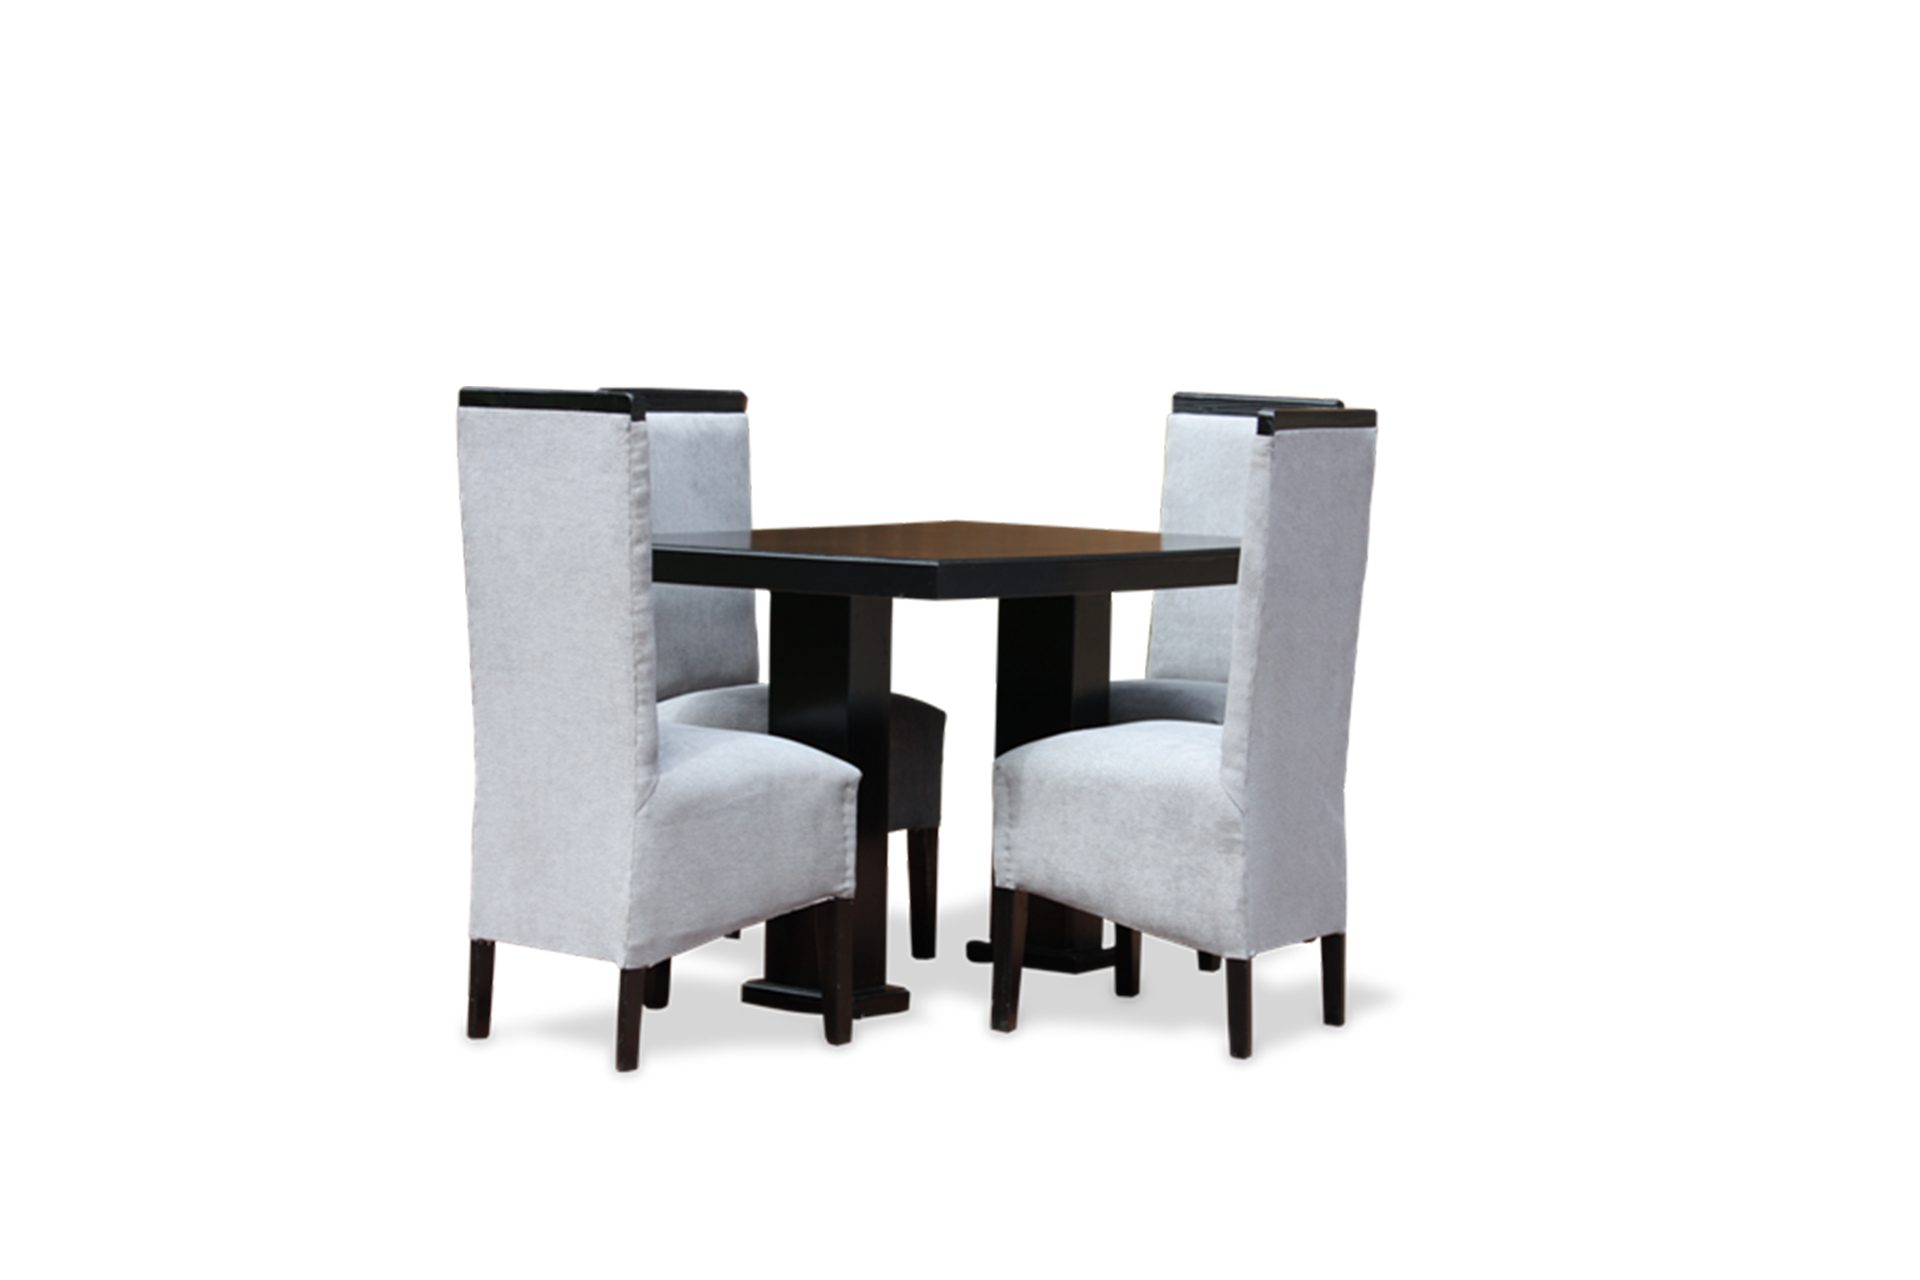 Lex-table-plus-4-chairs_small-size